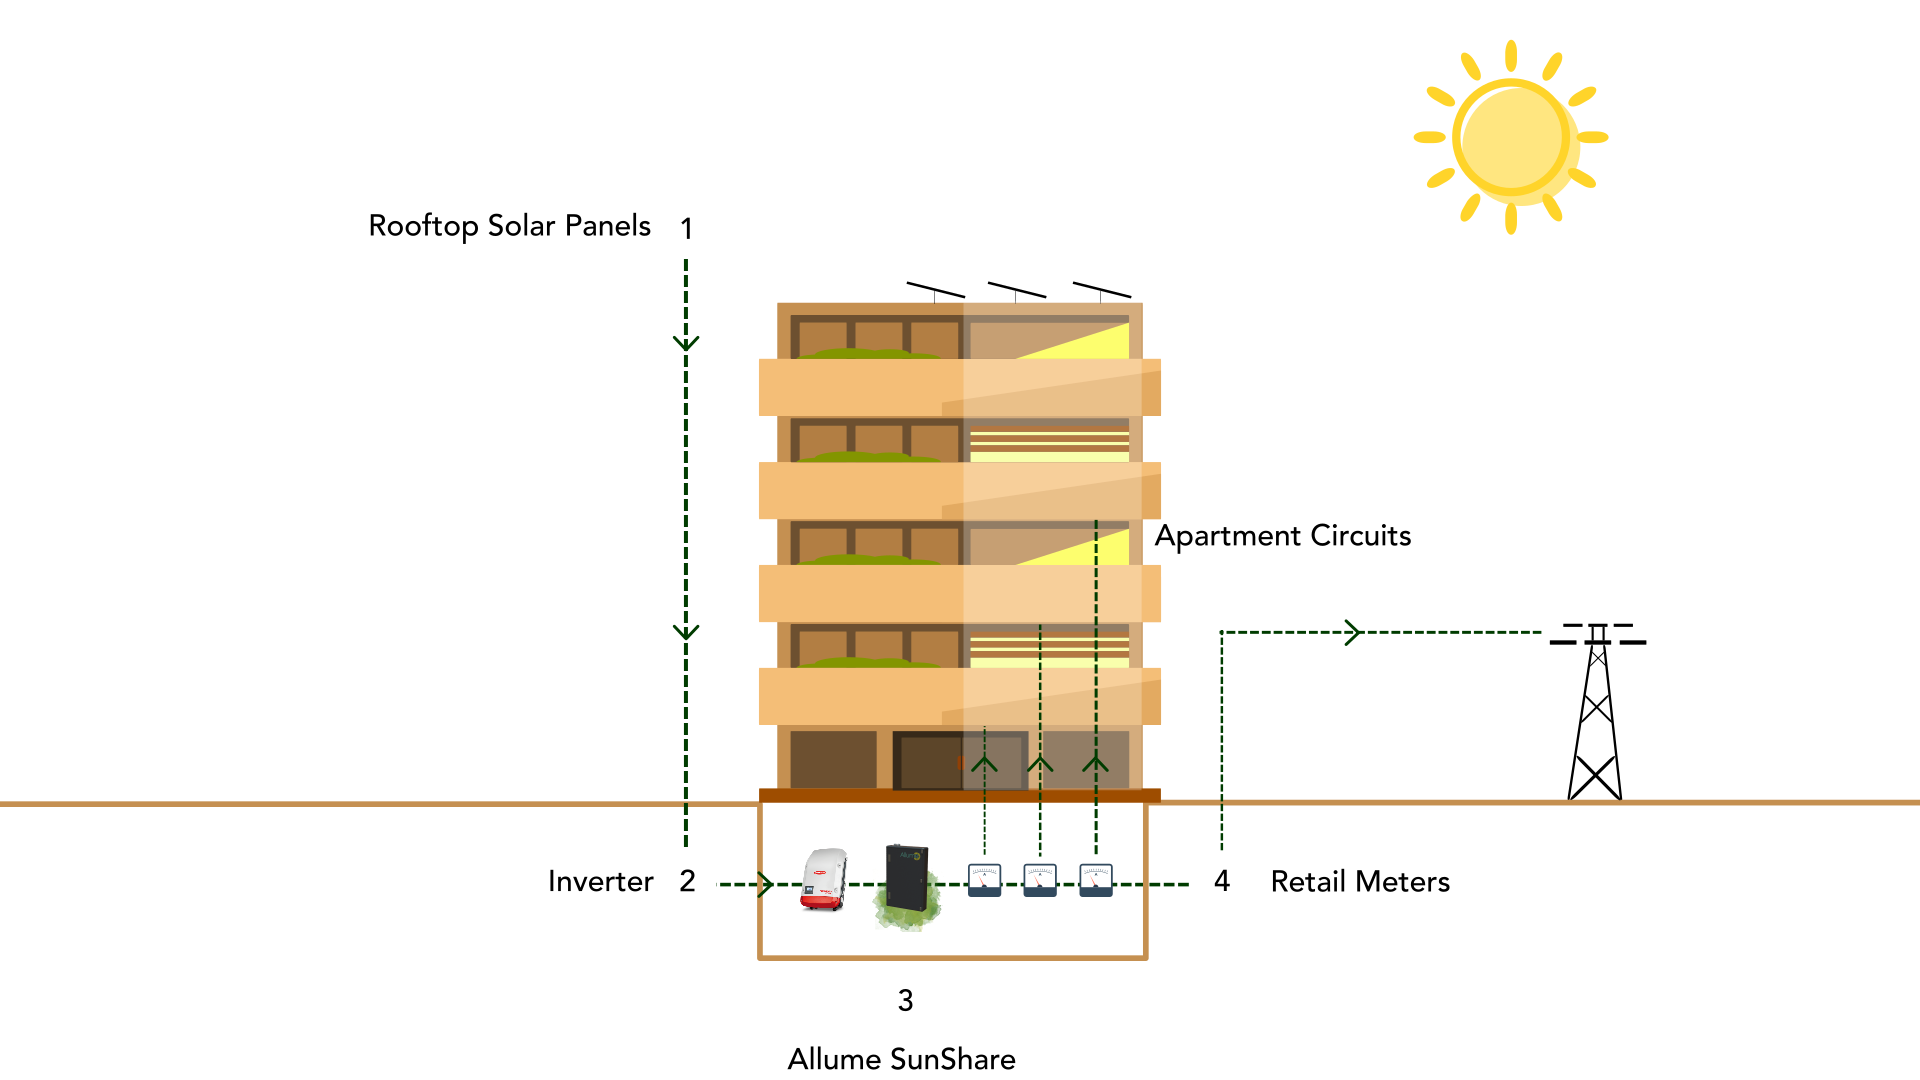 Diagram of Allume solshare product on a strata building